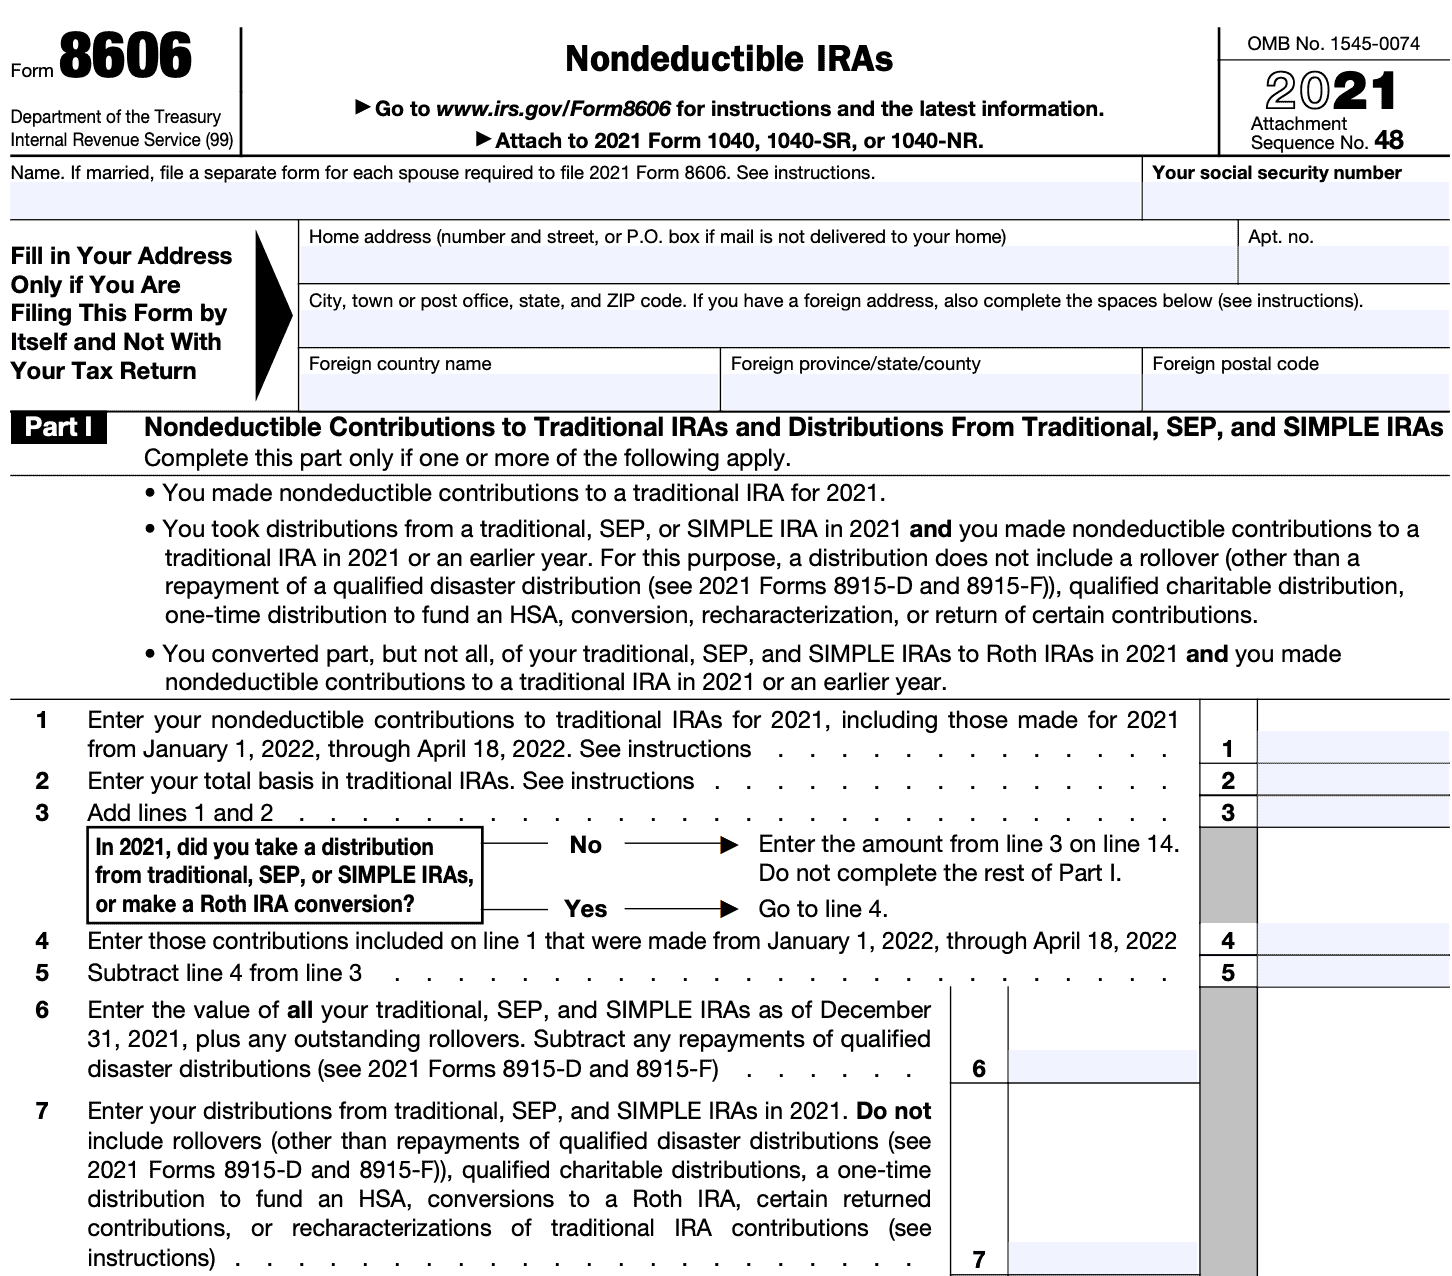 IRS Form 8606A Comprehensive Guide to Nondeductible IRAs